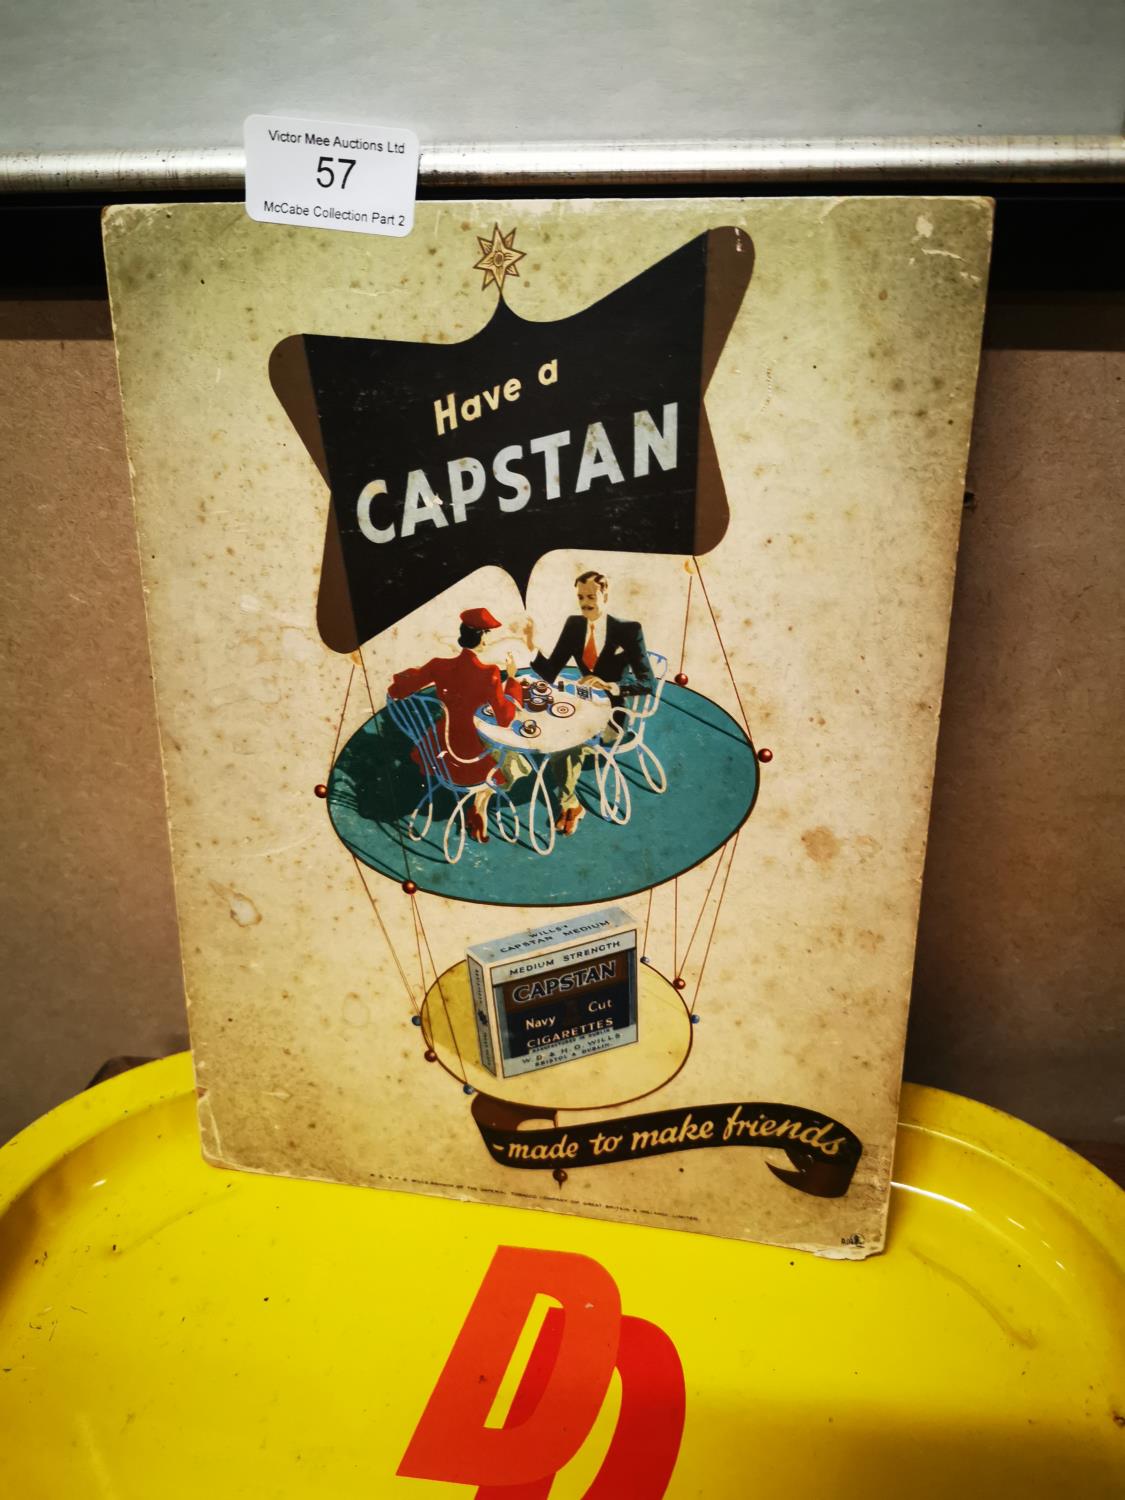 Have A Capstan's advertising showcard.